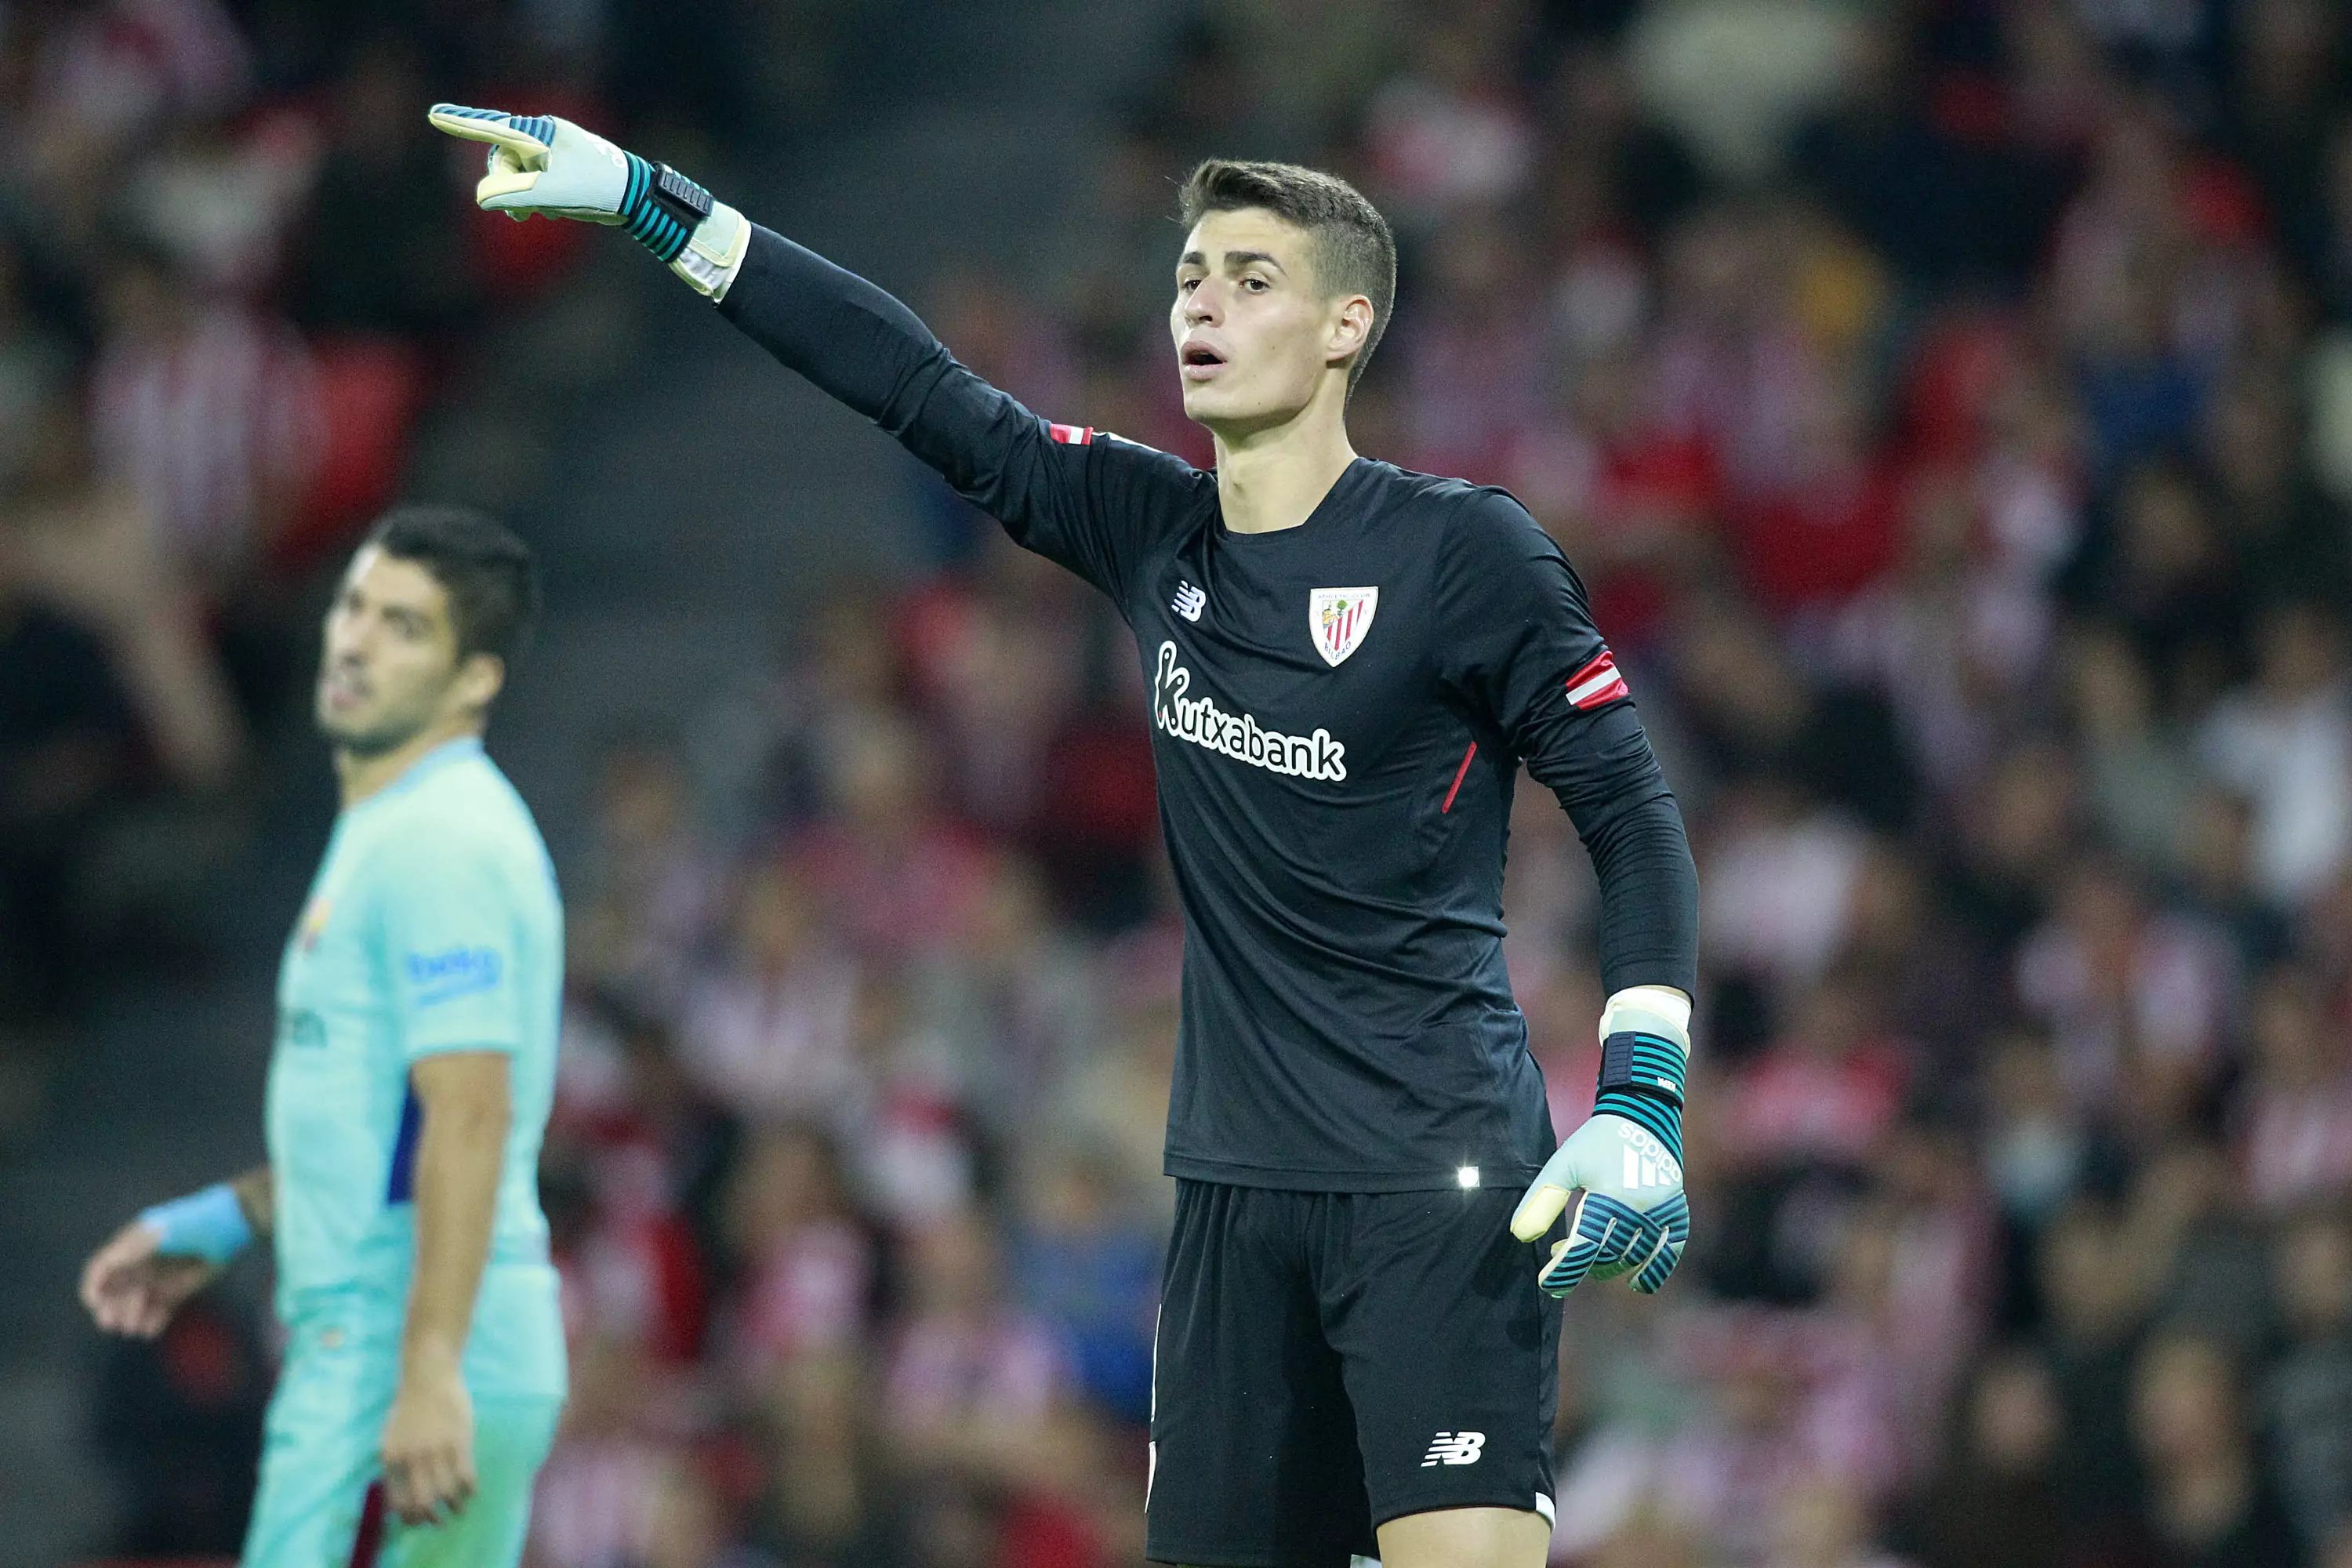 Athletic Bilbao's Kepa has been linked with Real Madrid in the past. Image: PA Images